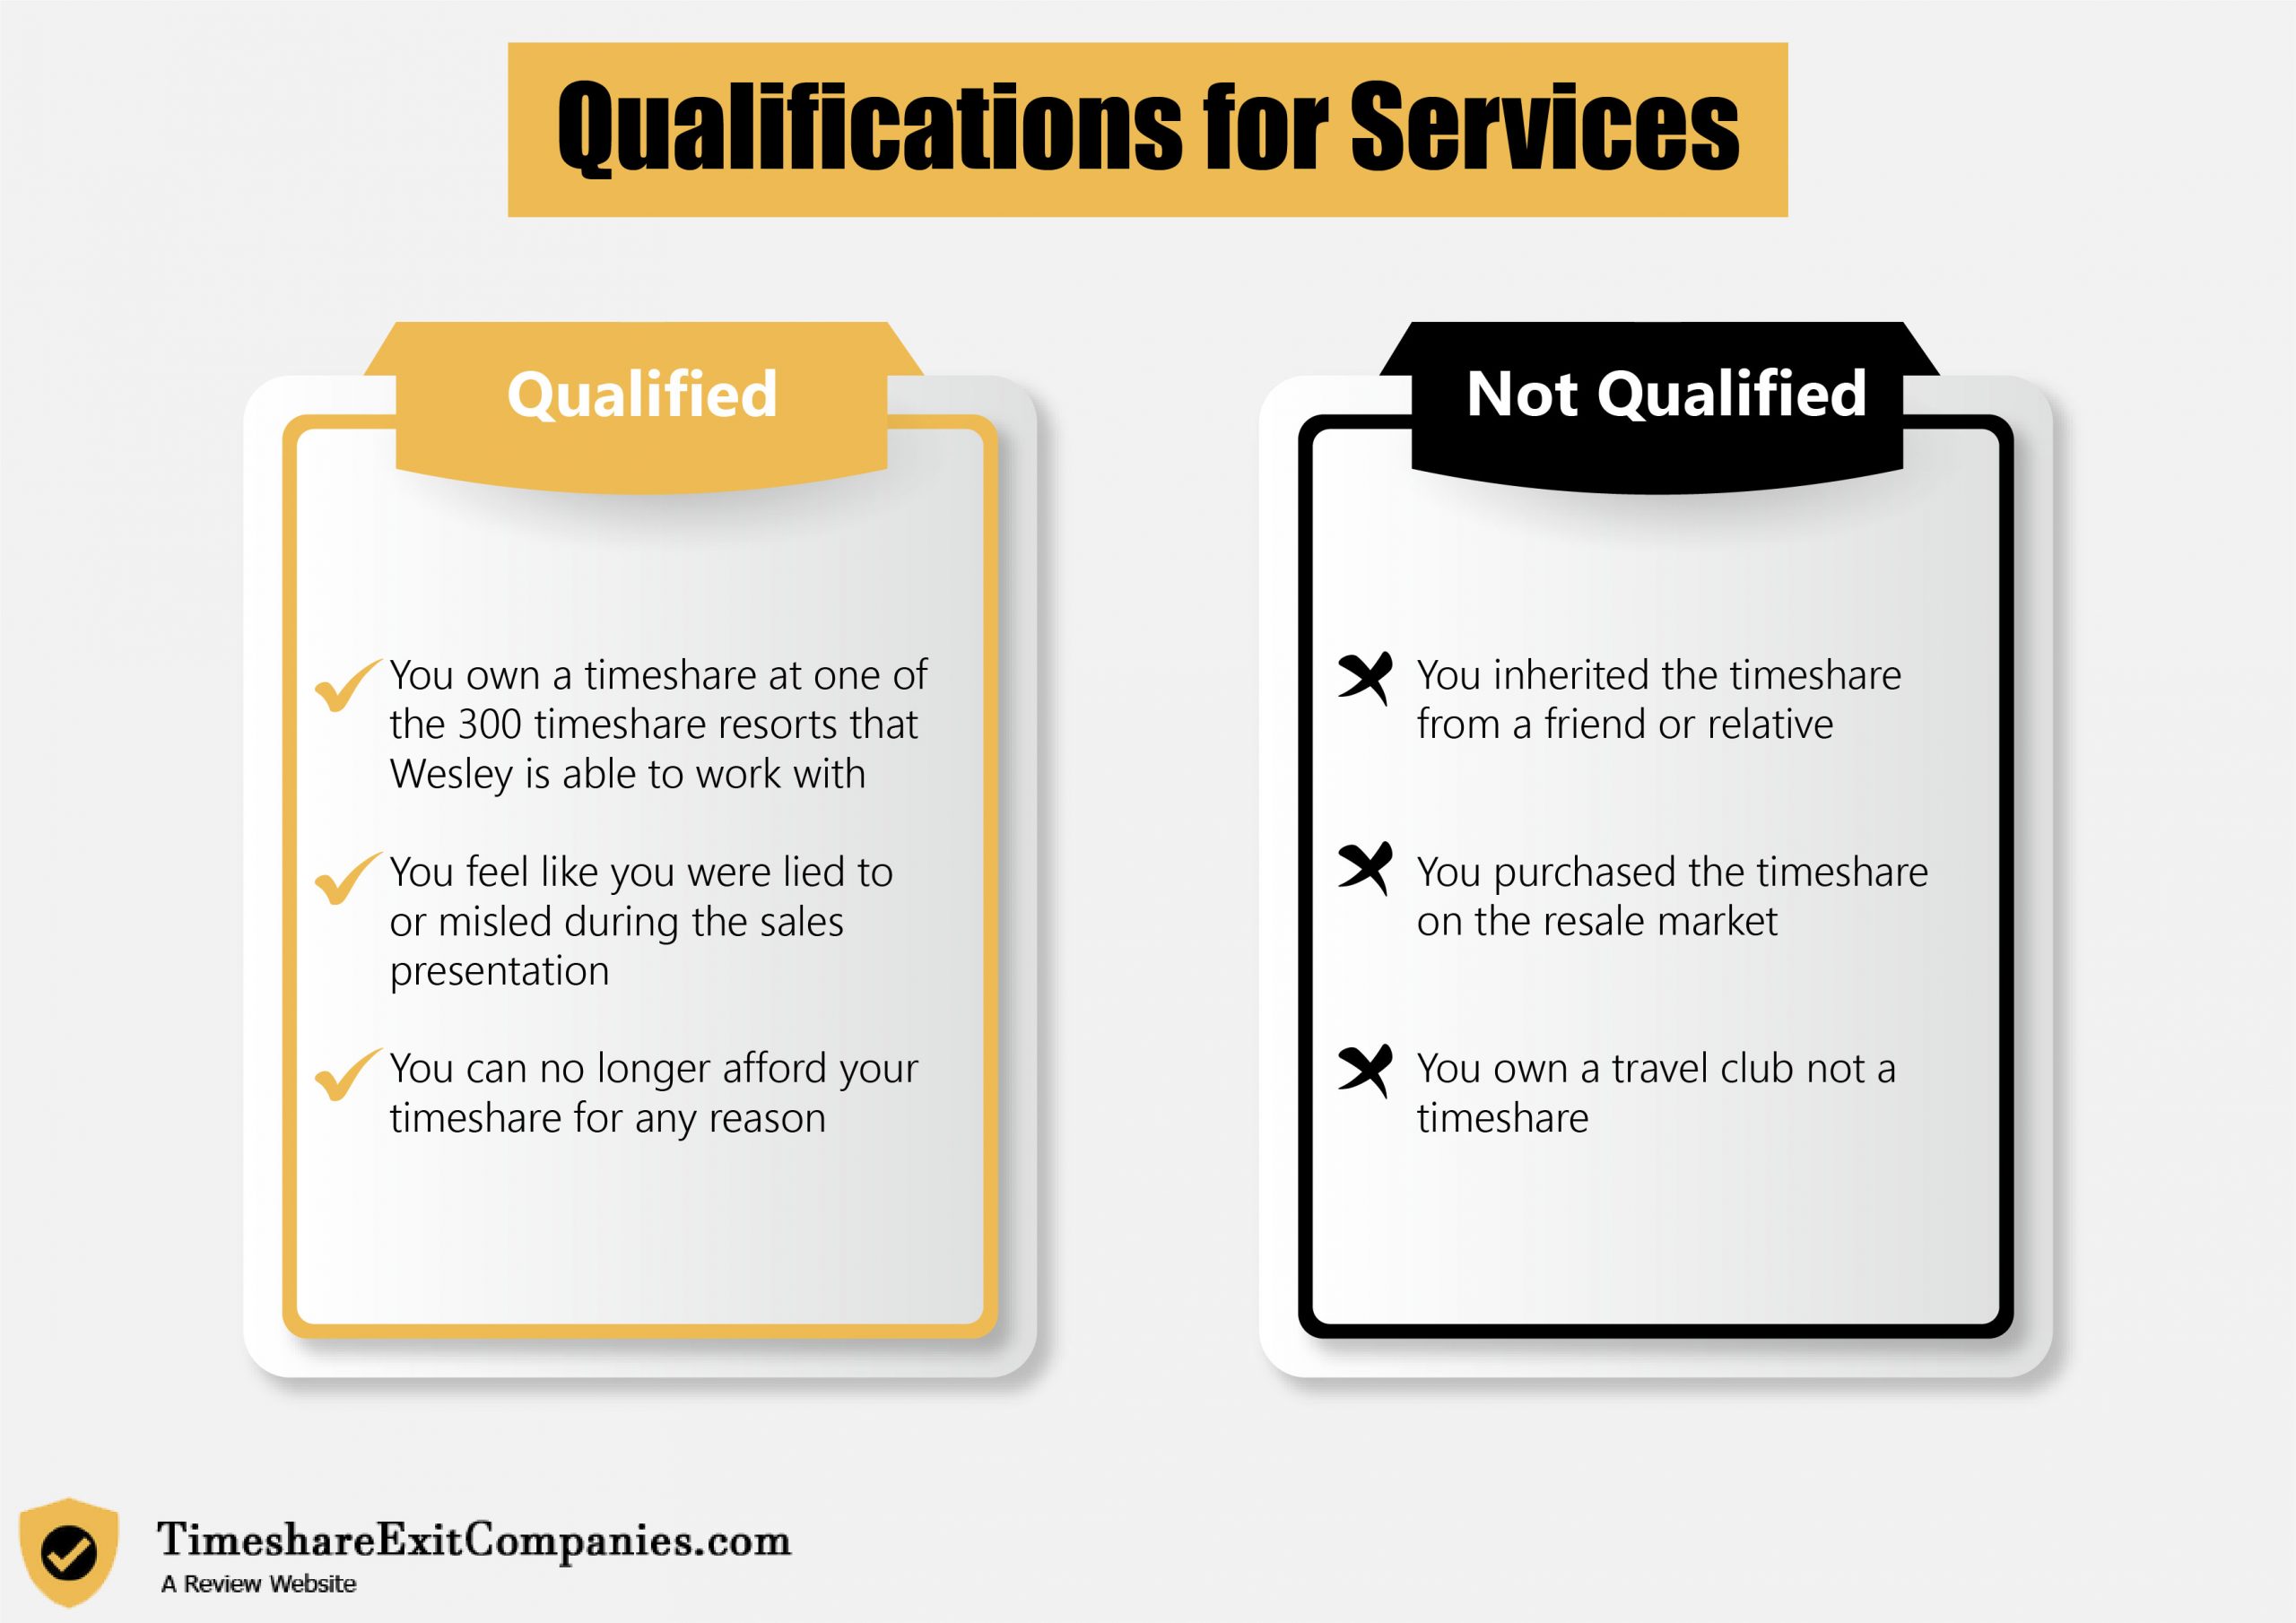 Wesley Financial Group Qualifications for Services